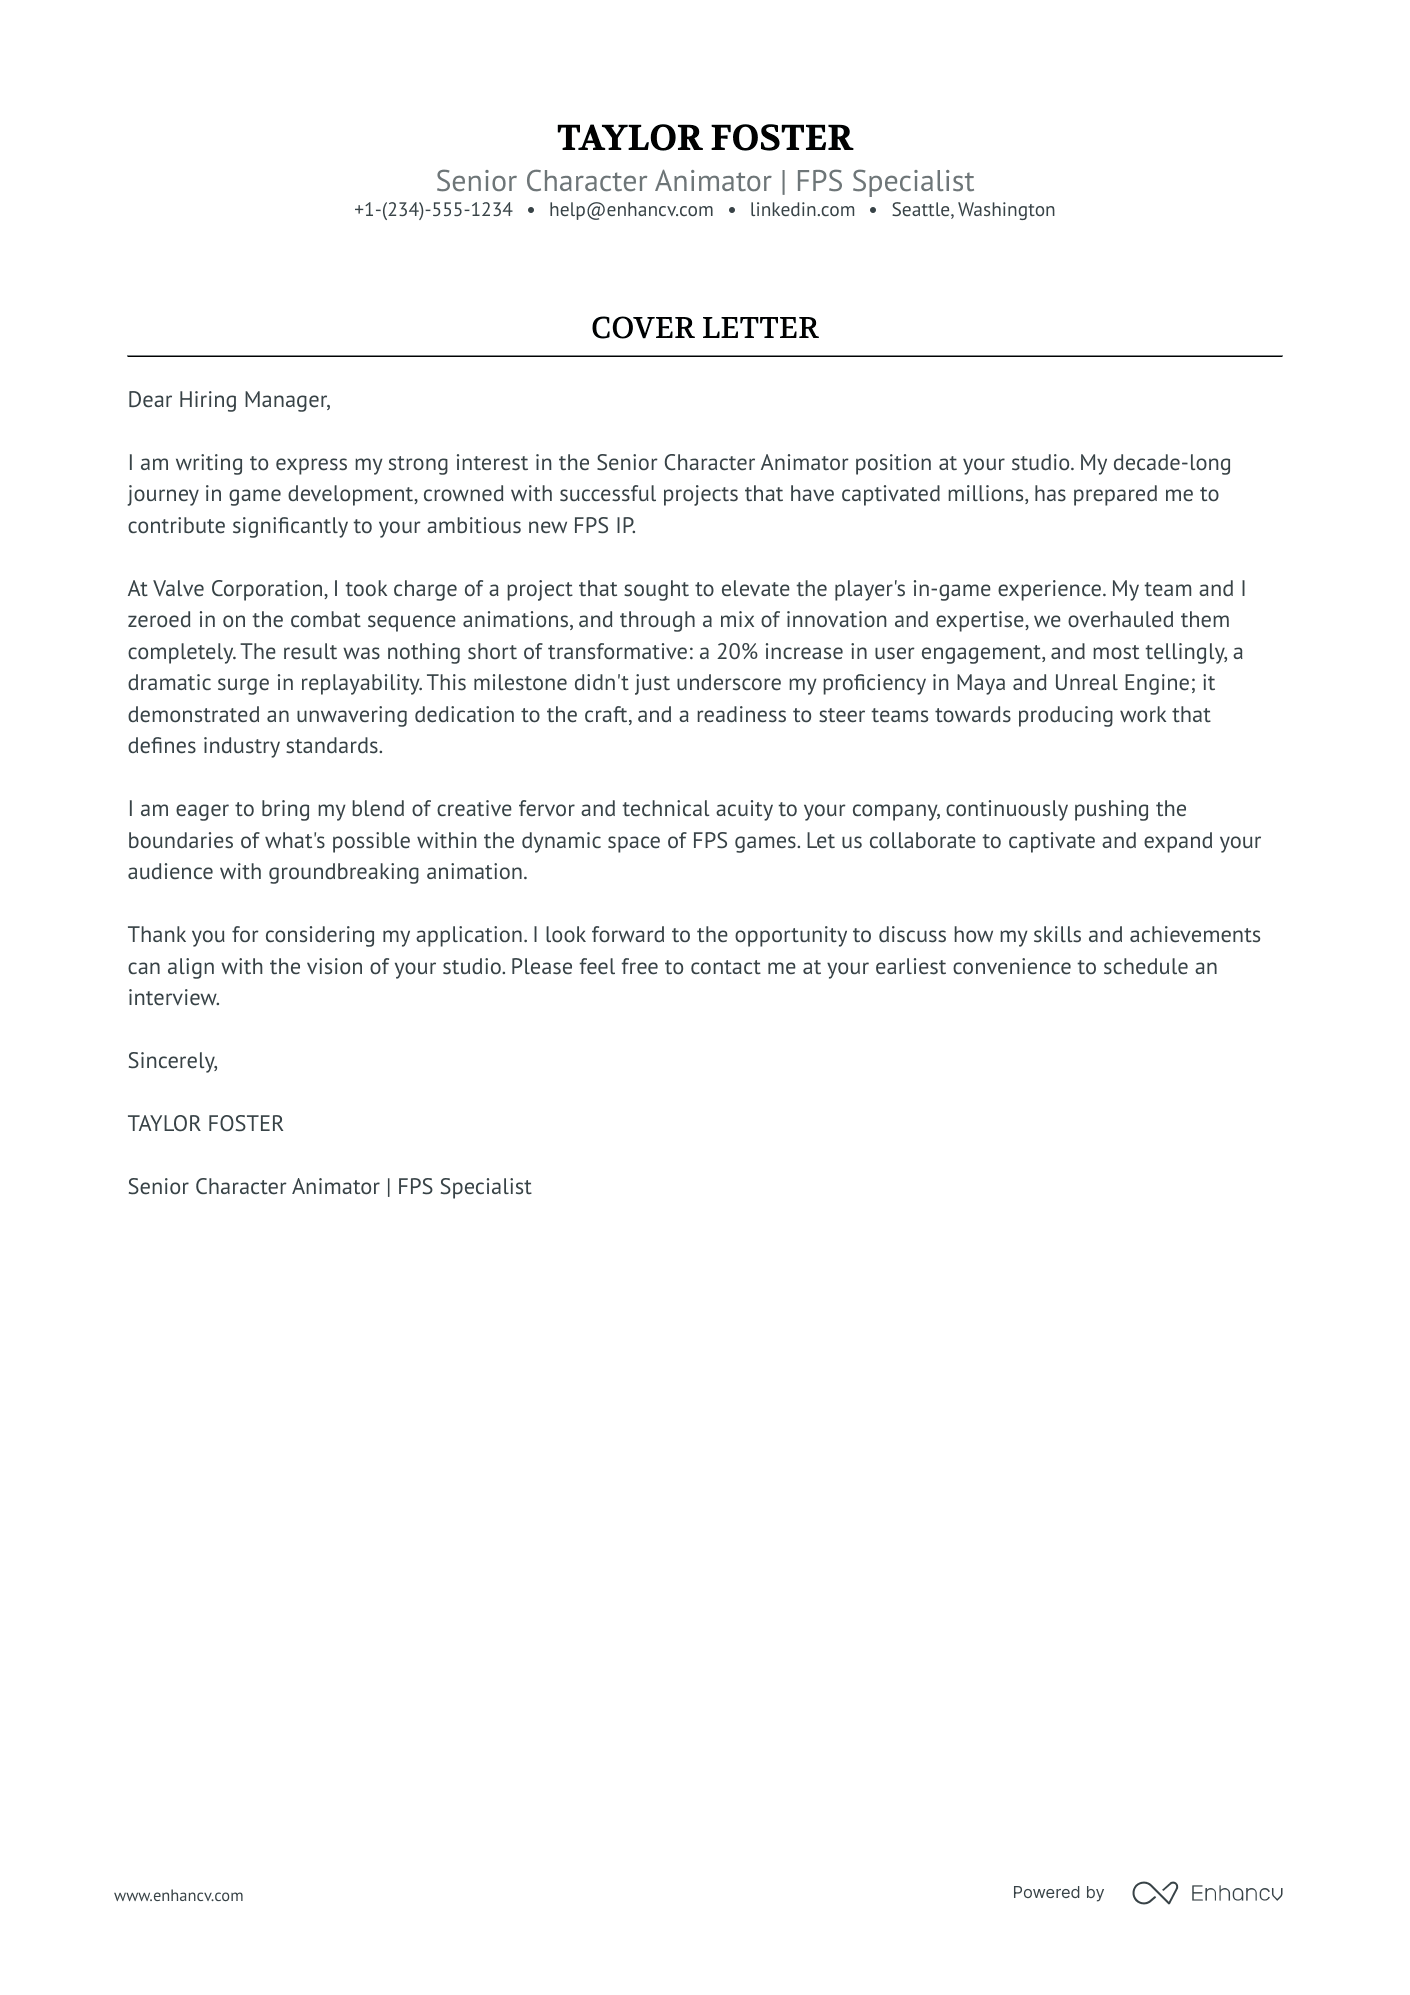 Character Animator cover letter